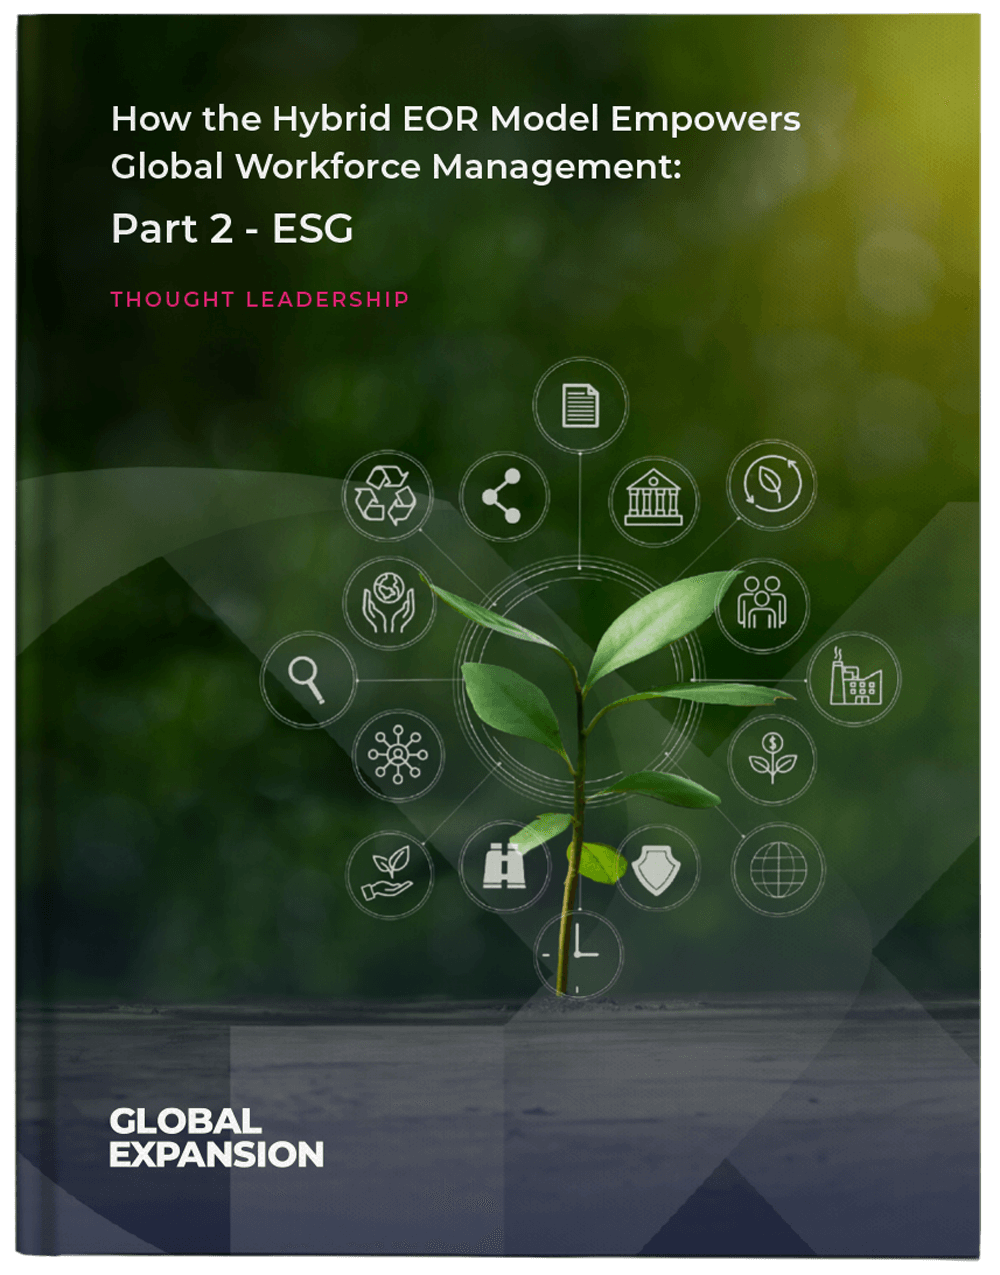 How-the-Hybrid-EOR-Model-Empowers-Global-Workforce-Management-Part-2-ESG-Cover